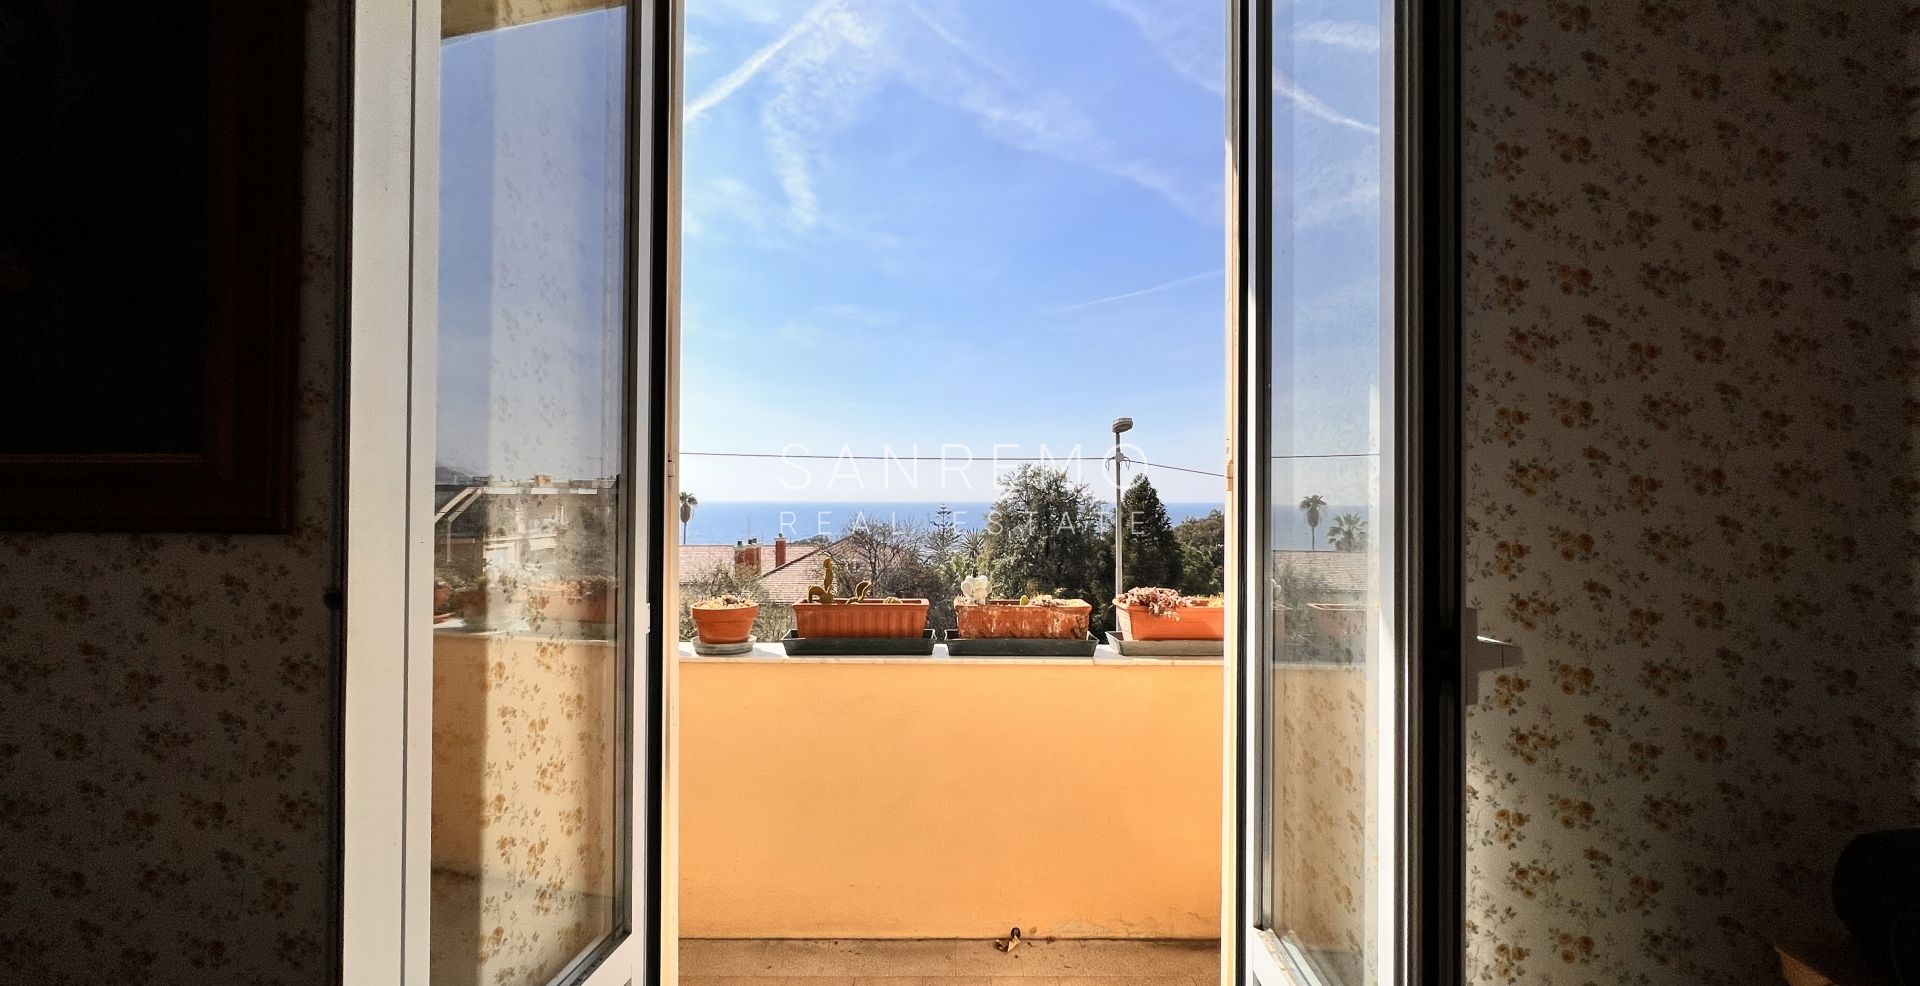 2 room apartment in Portosole area with nice sea view